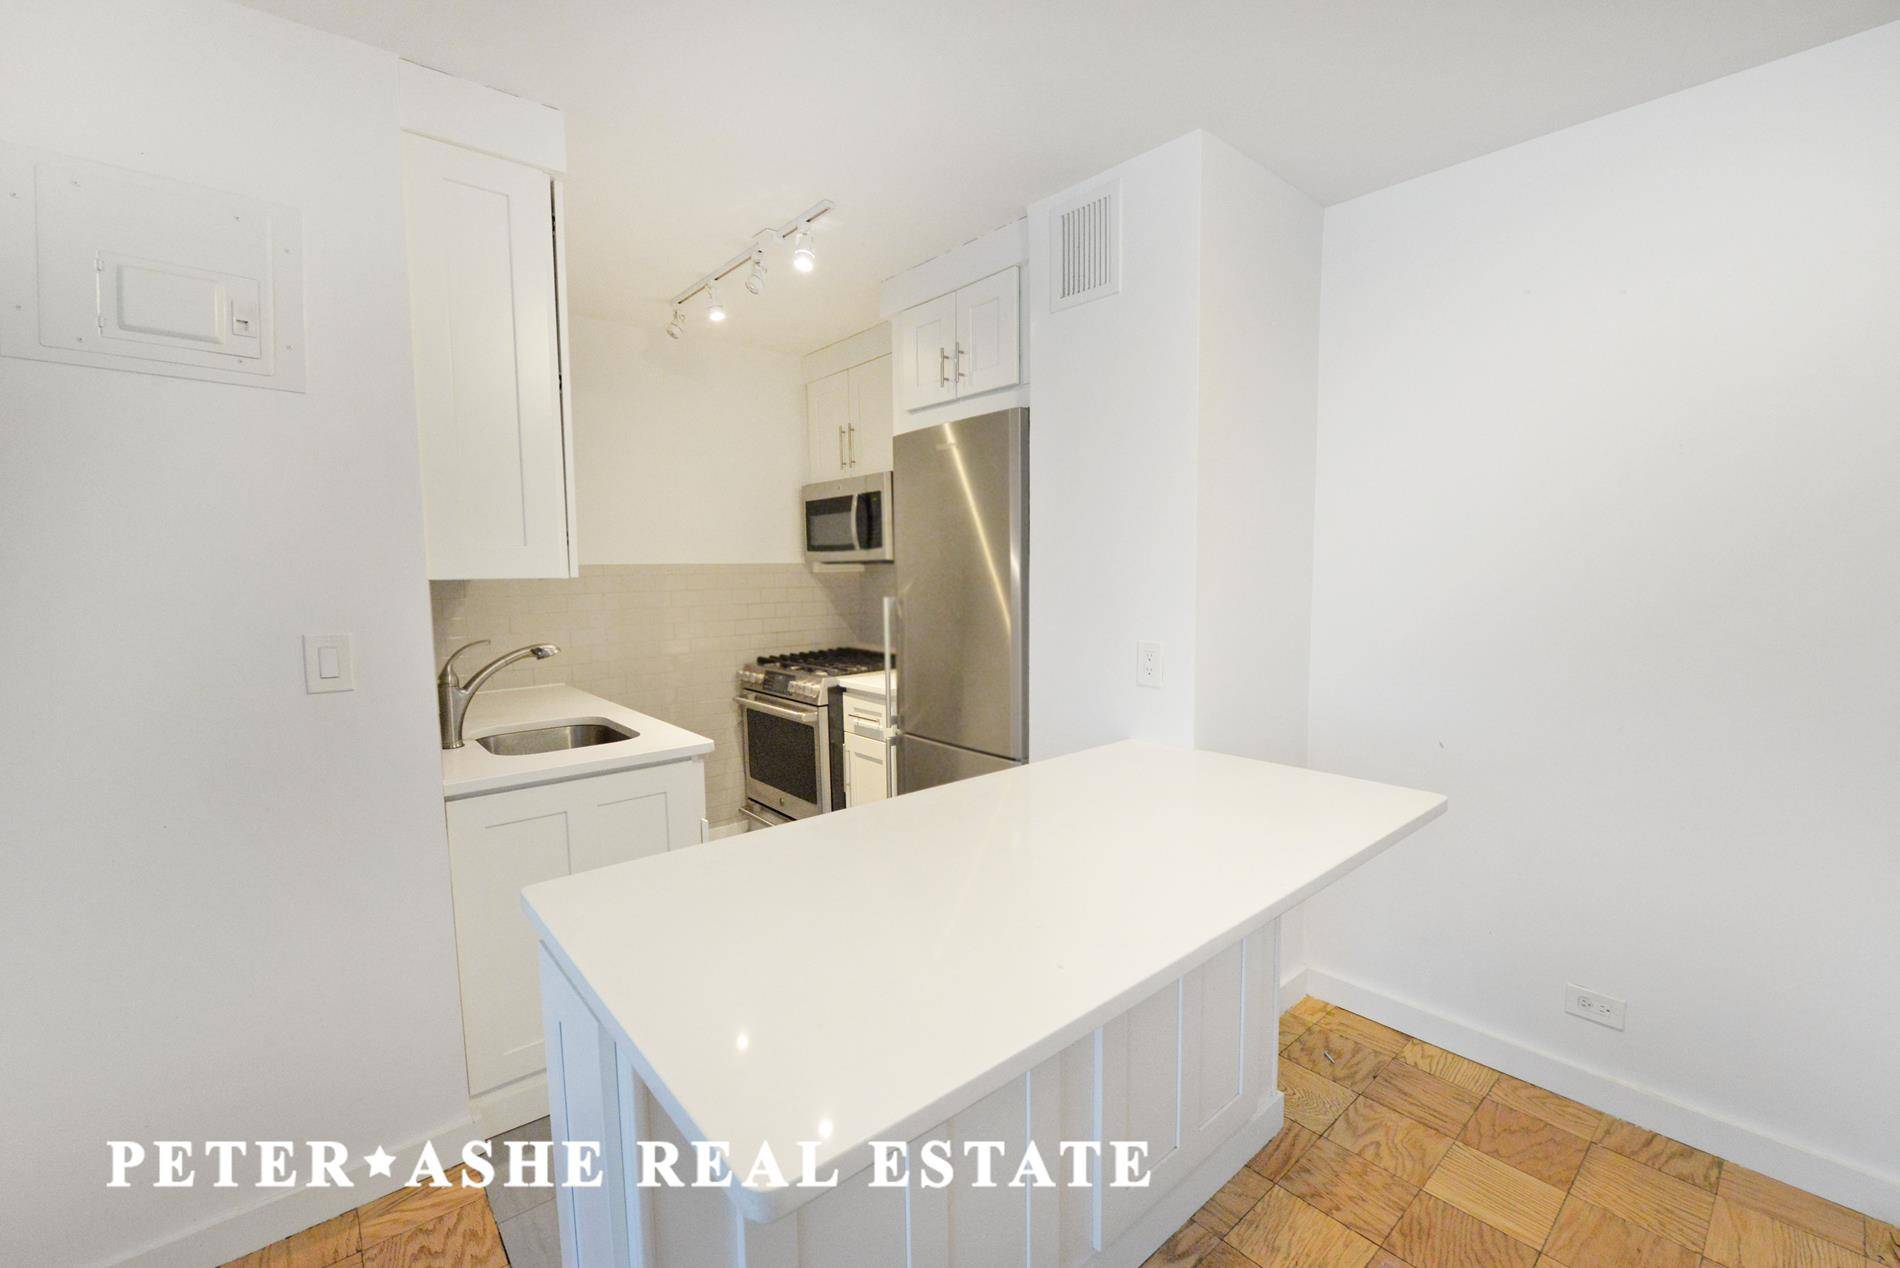 This wonderful, split 2 bedroom 2 baths condo home features an abundance of bright sunlight and eastern open views Other features include a renovated open kitchen with stainless steel appliances, ...